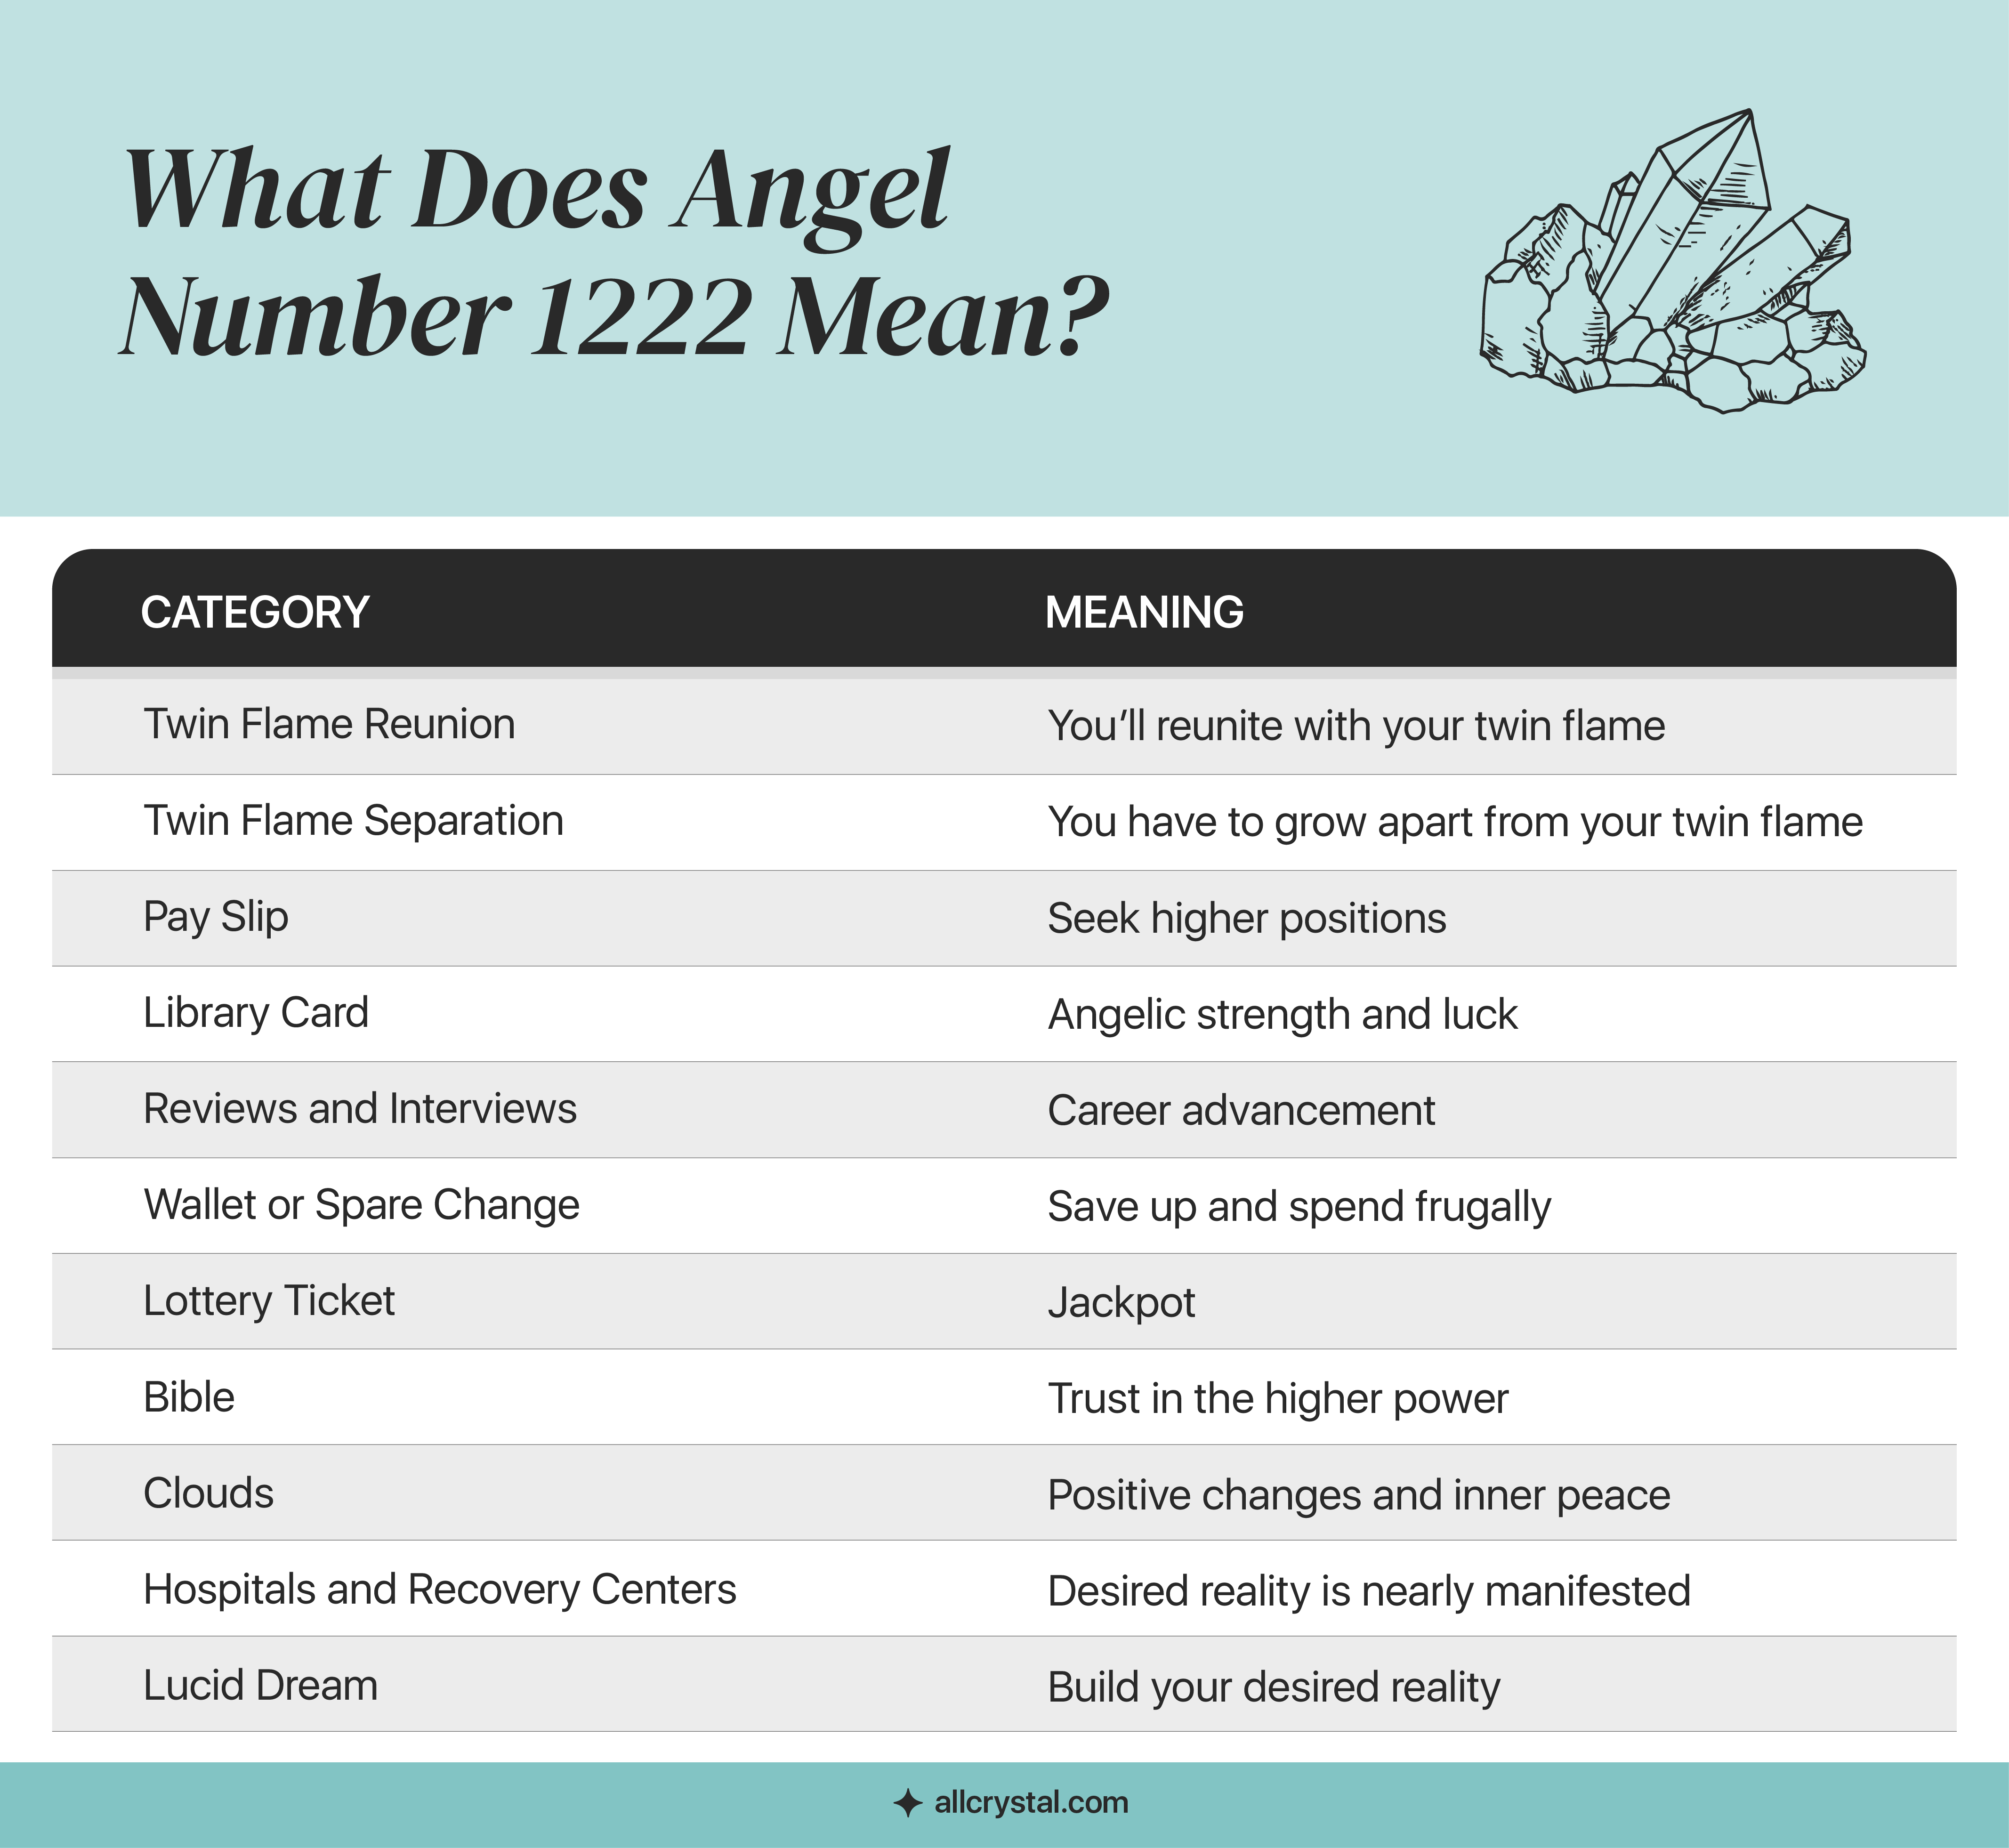 A graphics table showing the meaning of angel number 1222